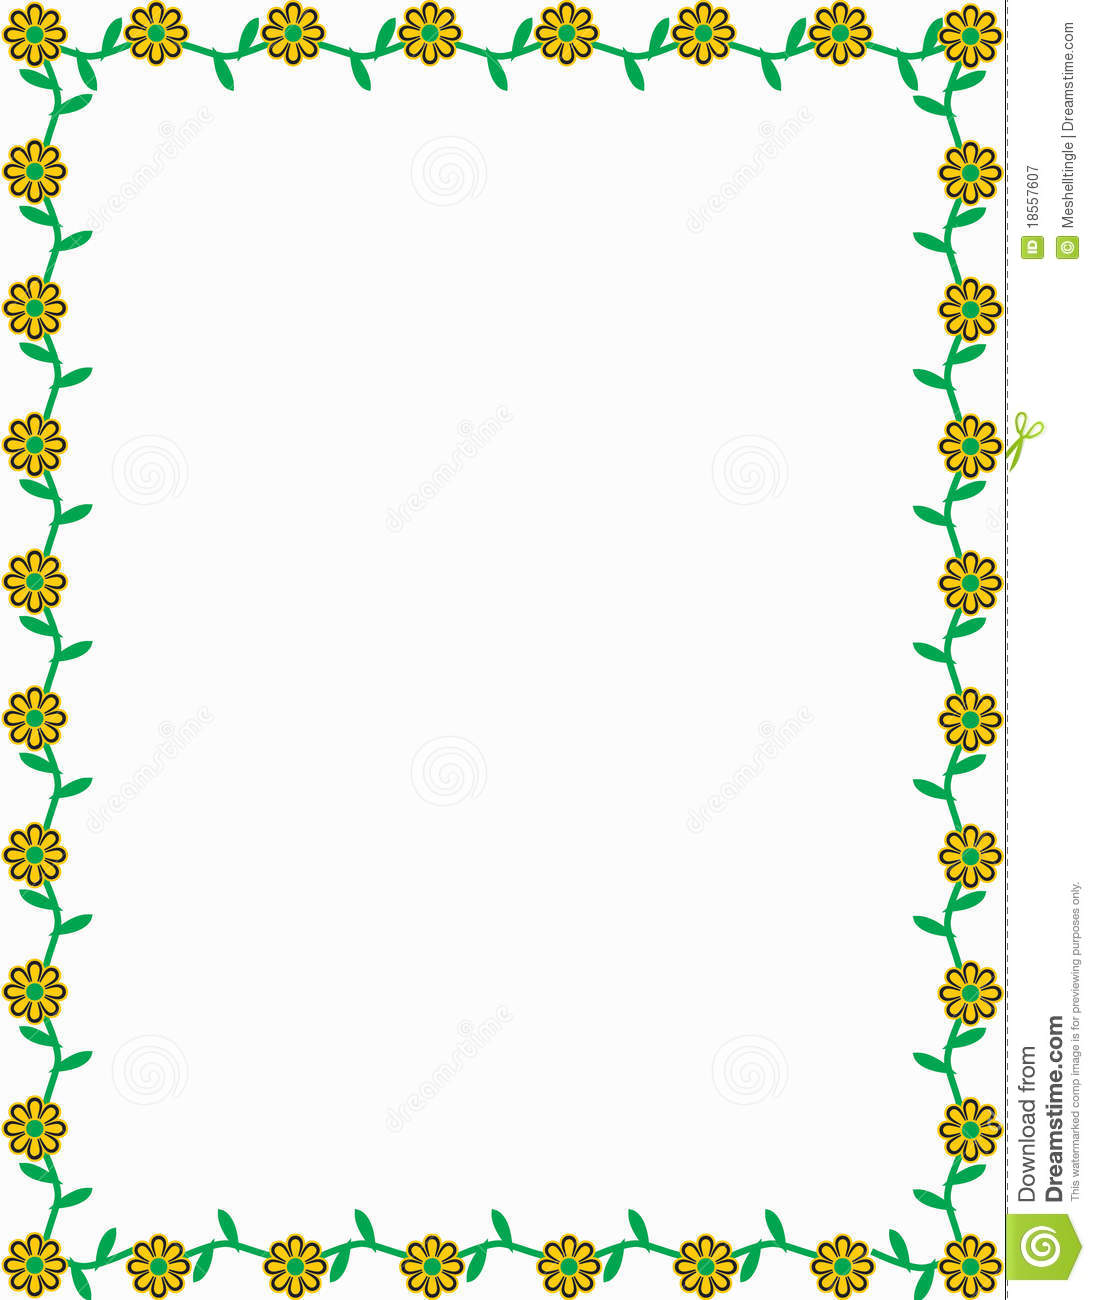 clipart spring flowers border - photo #33